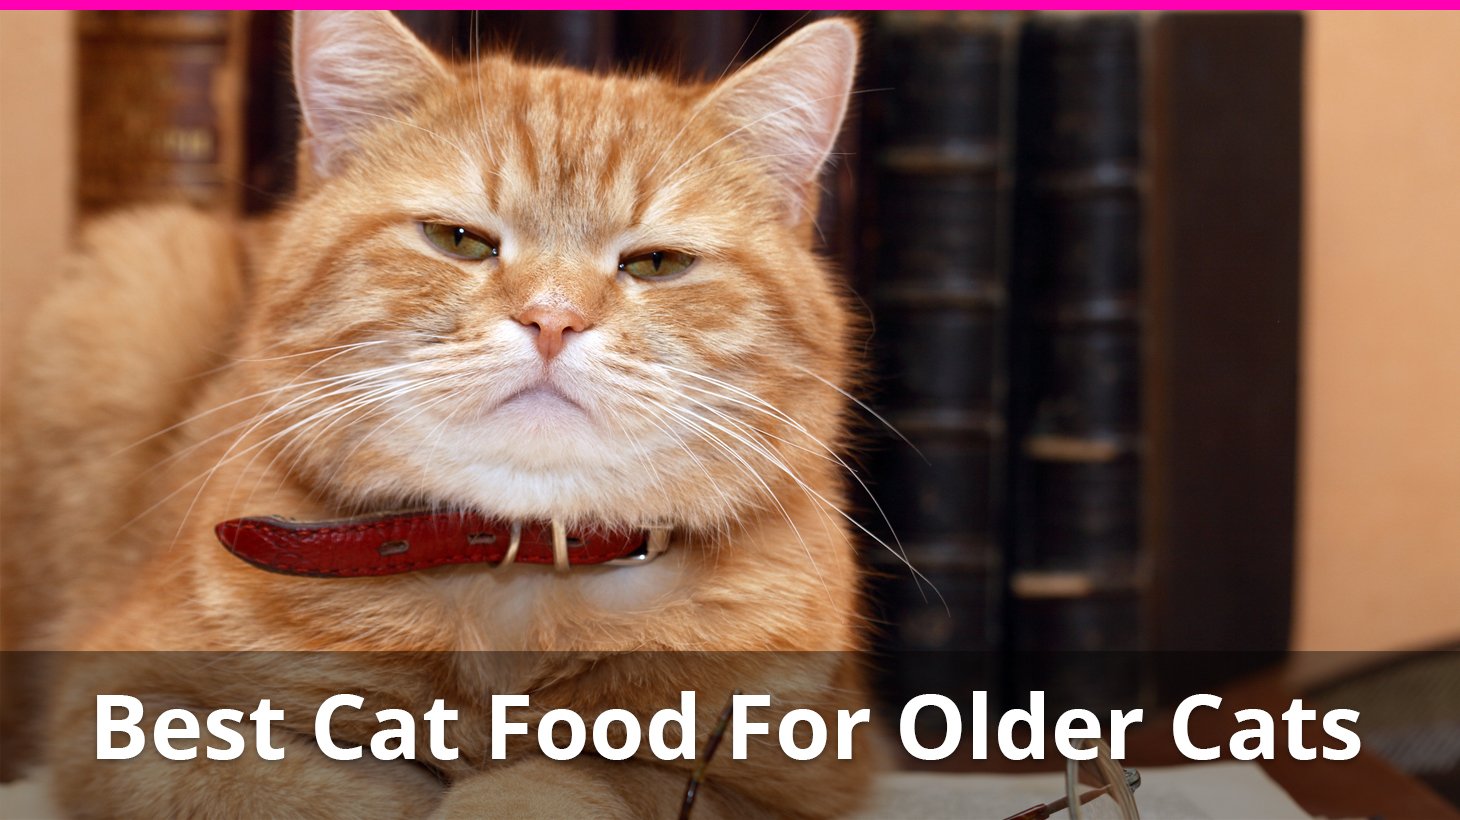 Best Cat Food For Older Cats Reviews of the Top Foods for Senior Cats